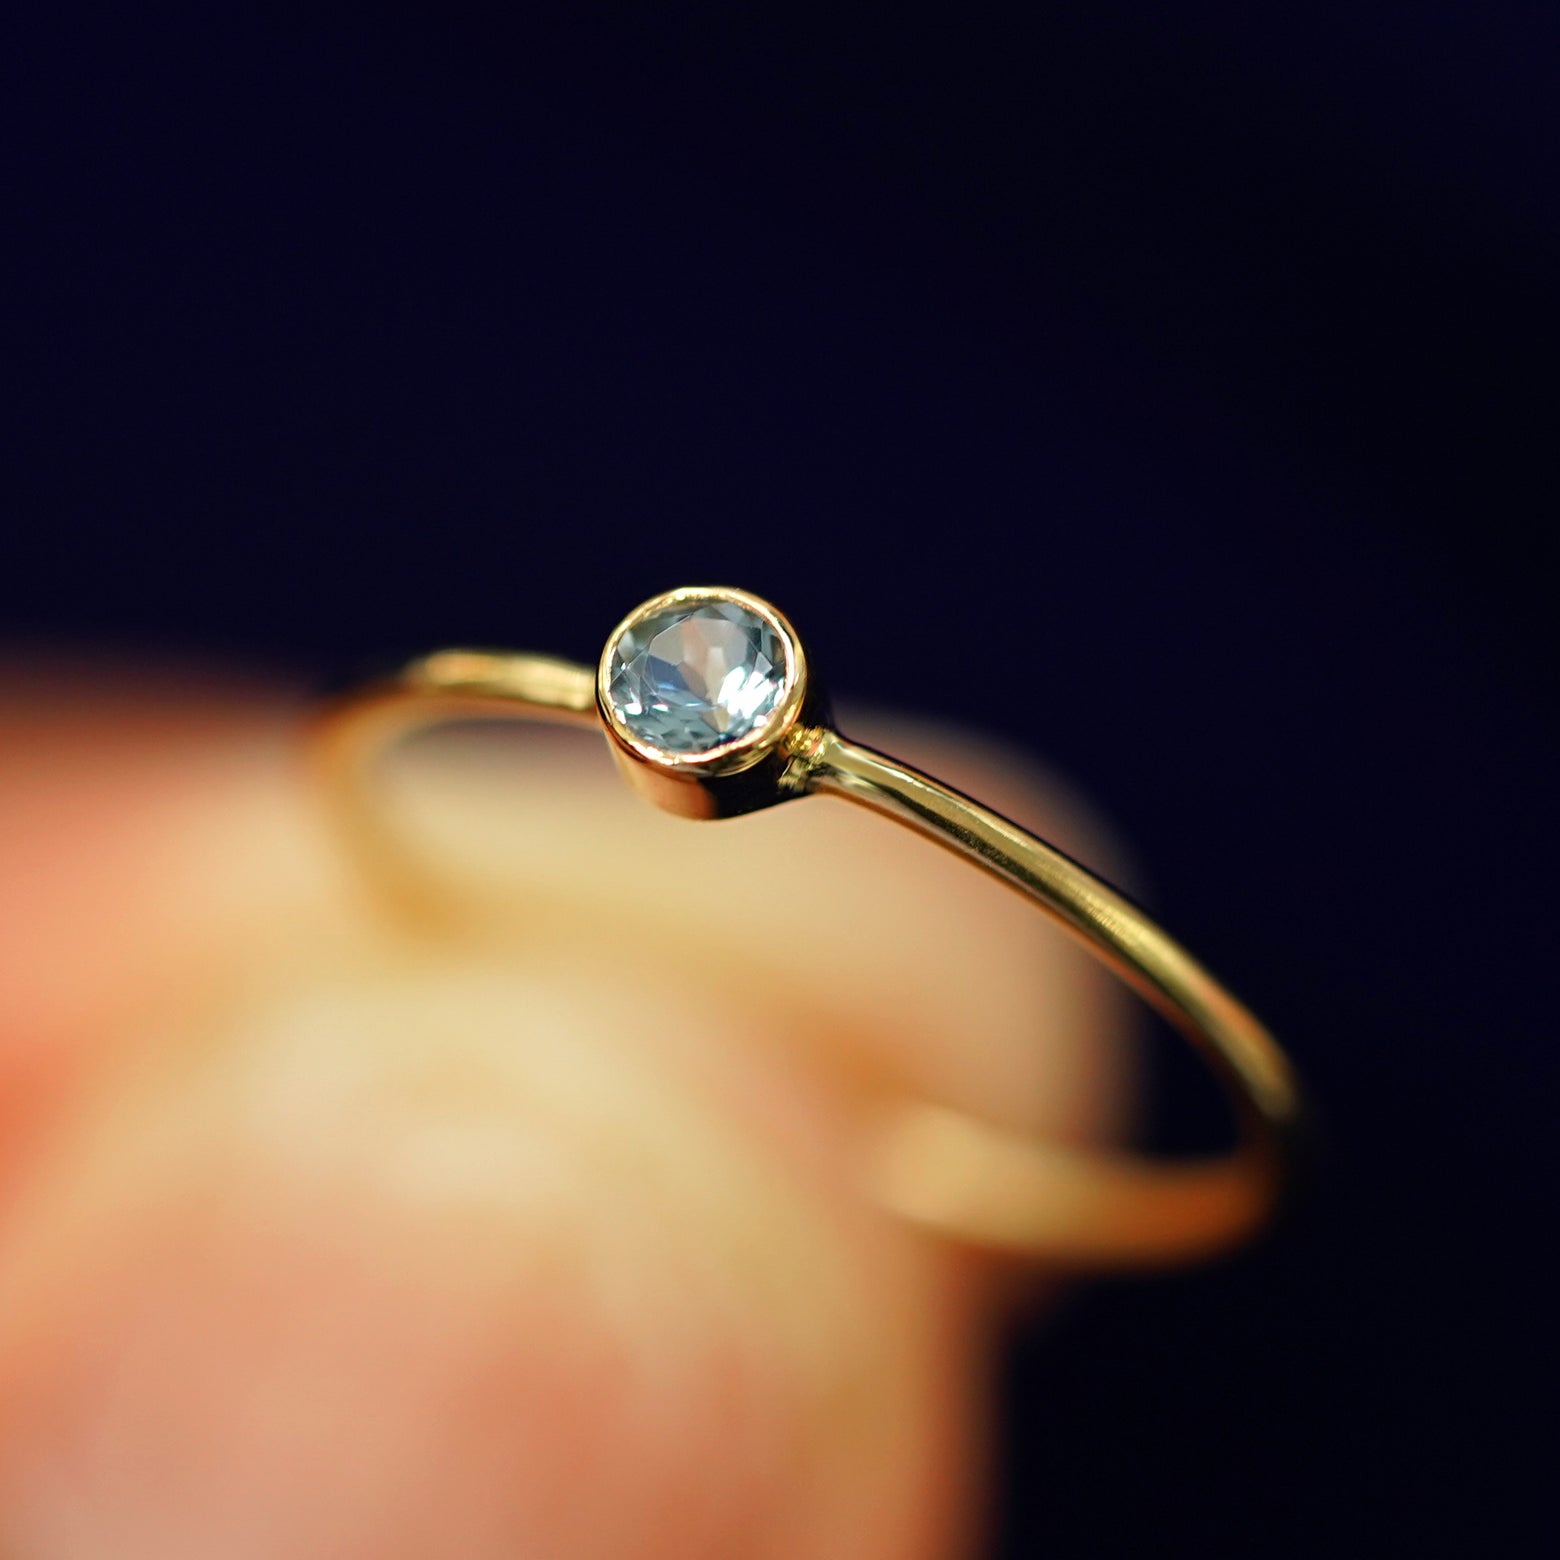 A model holding an Aquamarine Ring tilted to show the bezel setting